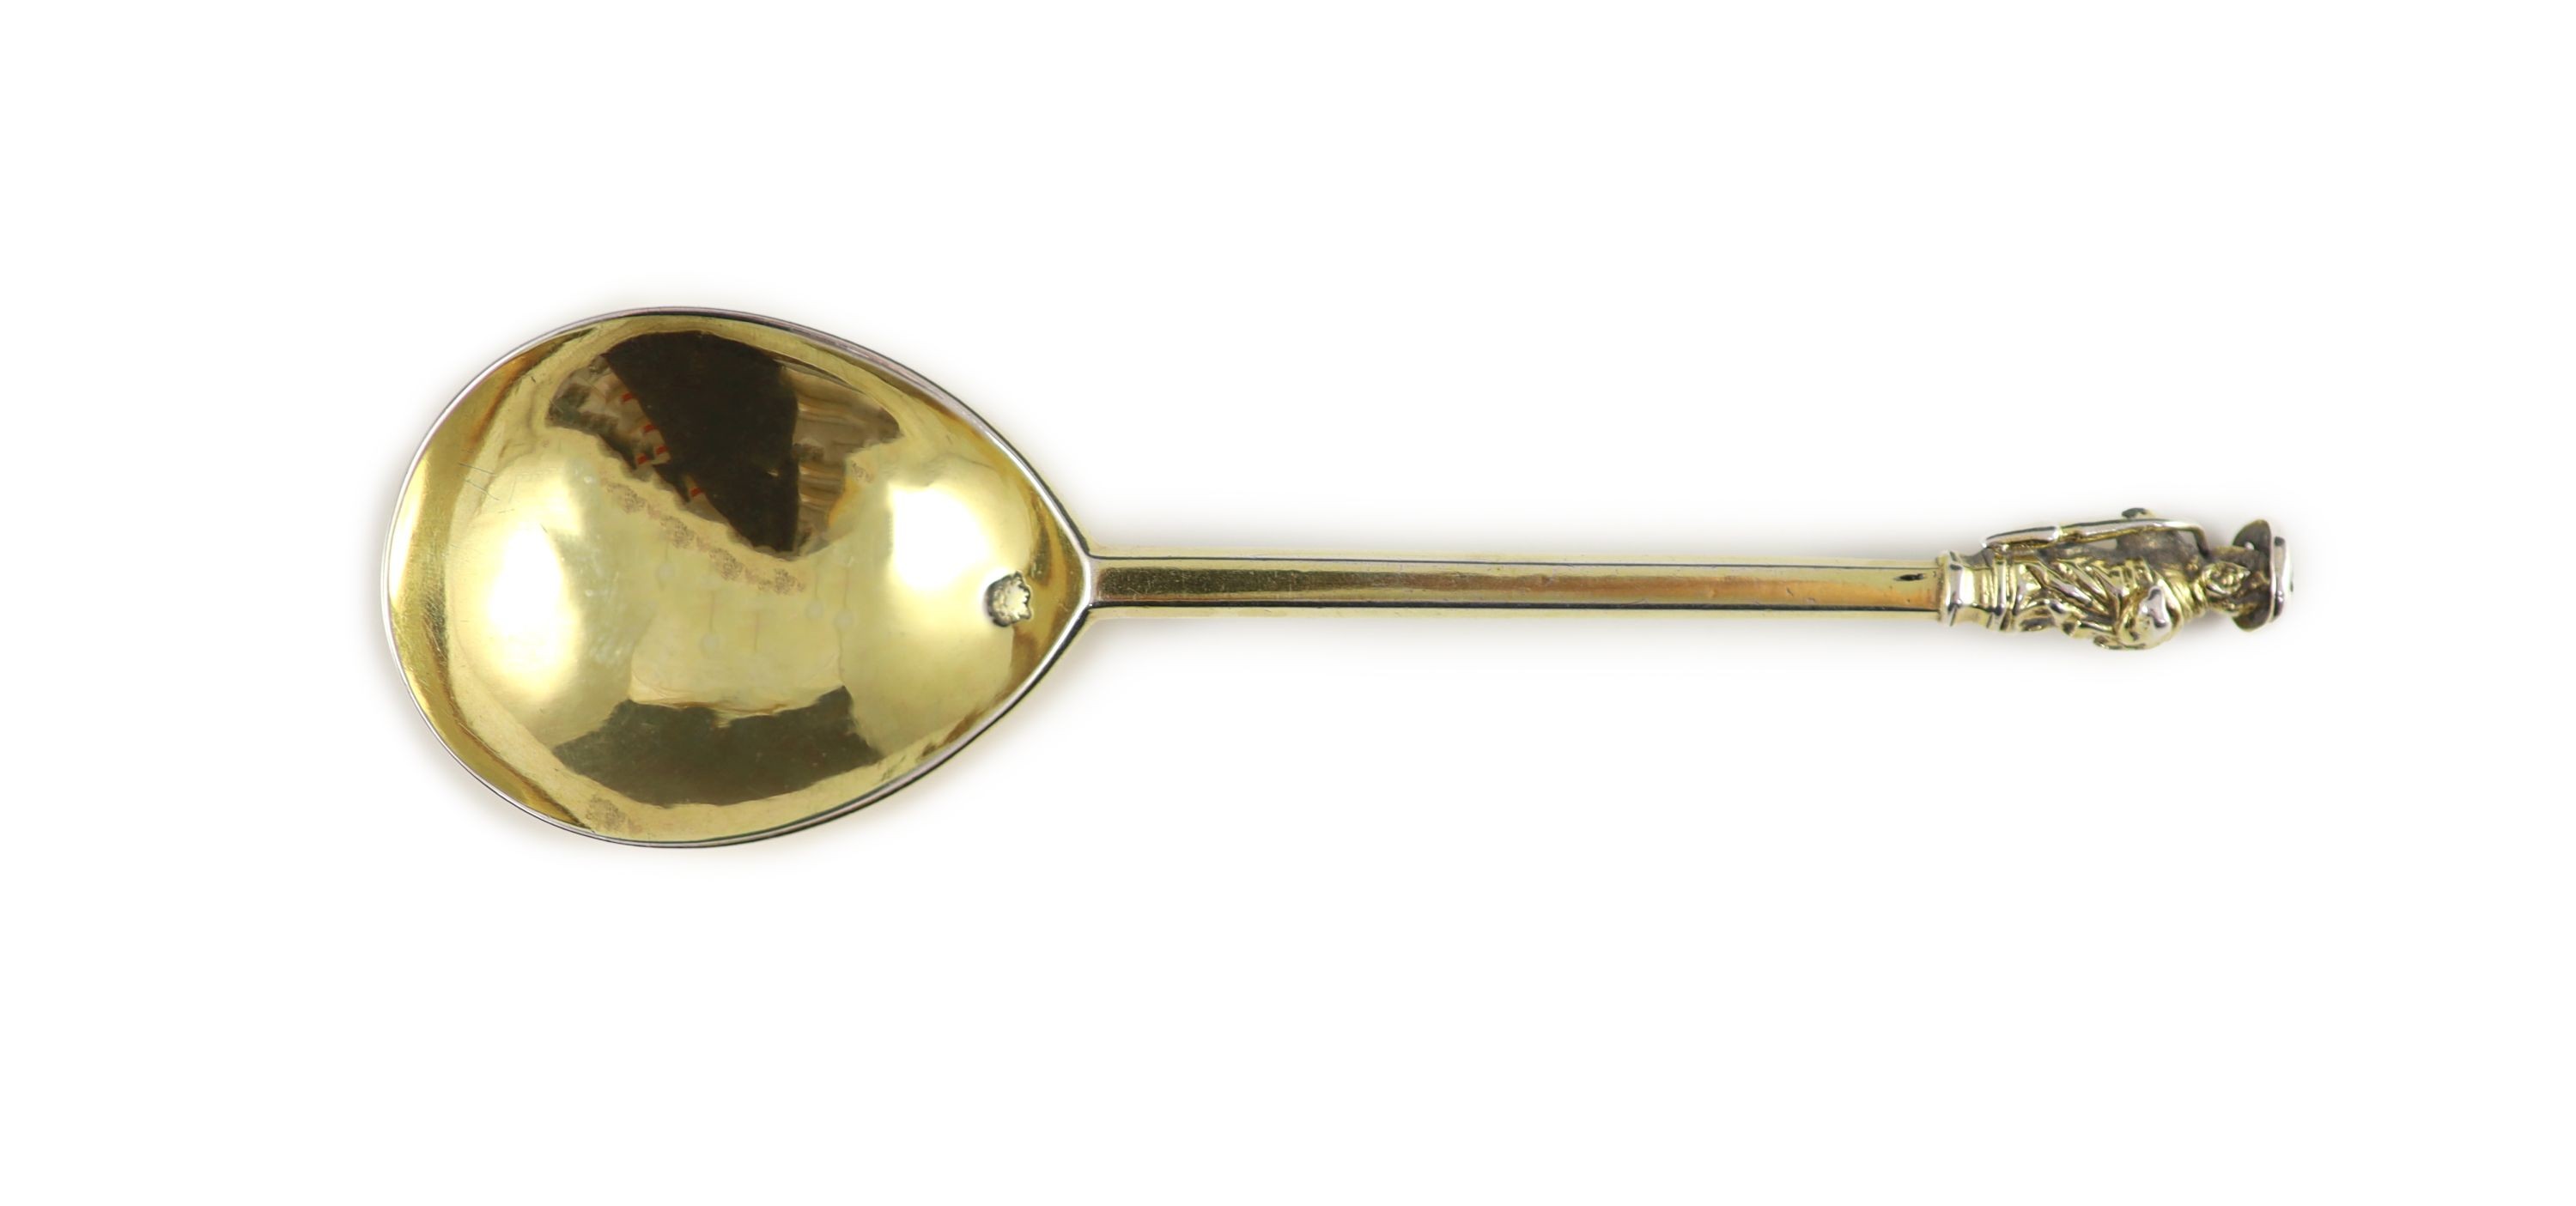 An Elizabeth I silver gilt Apostle spoon, likely St. Thomas, possibly Patrick Brue, London, 1592, 18cm long, 2.1 oz (possibly re-gilded)